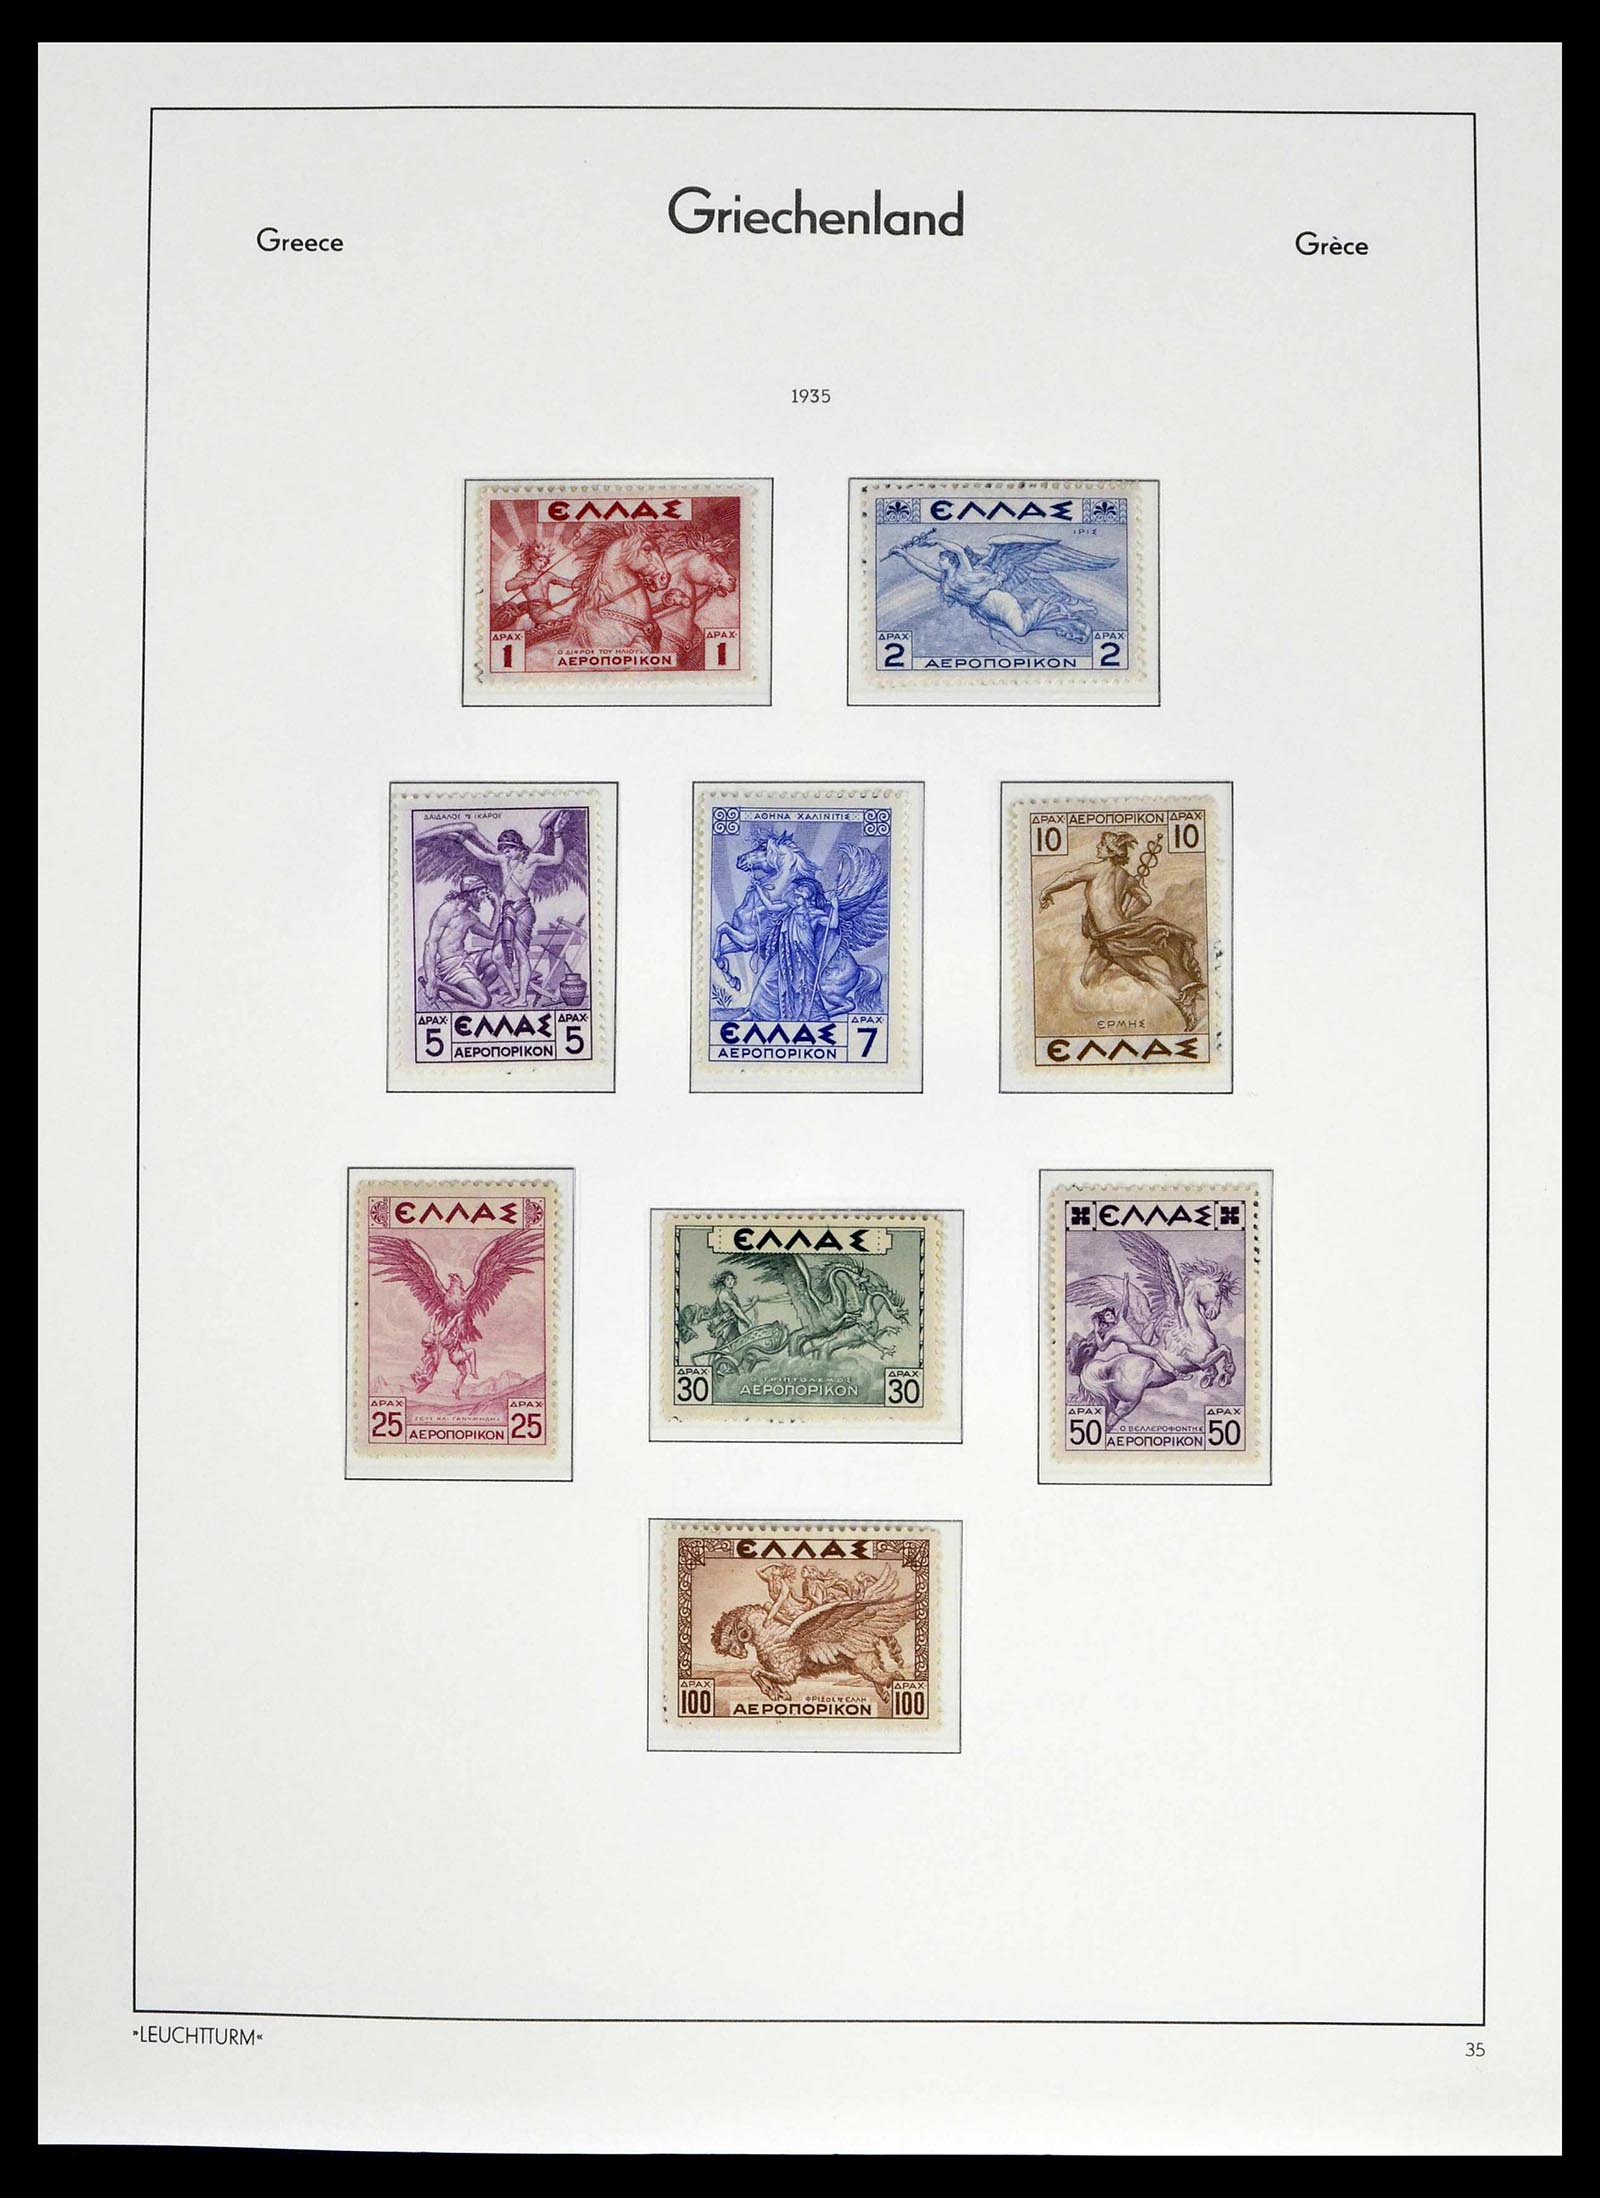 39243 0030 - Stamp collection 39243 Greece 1861-1965.